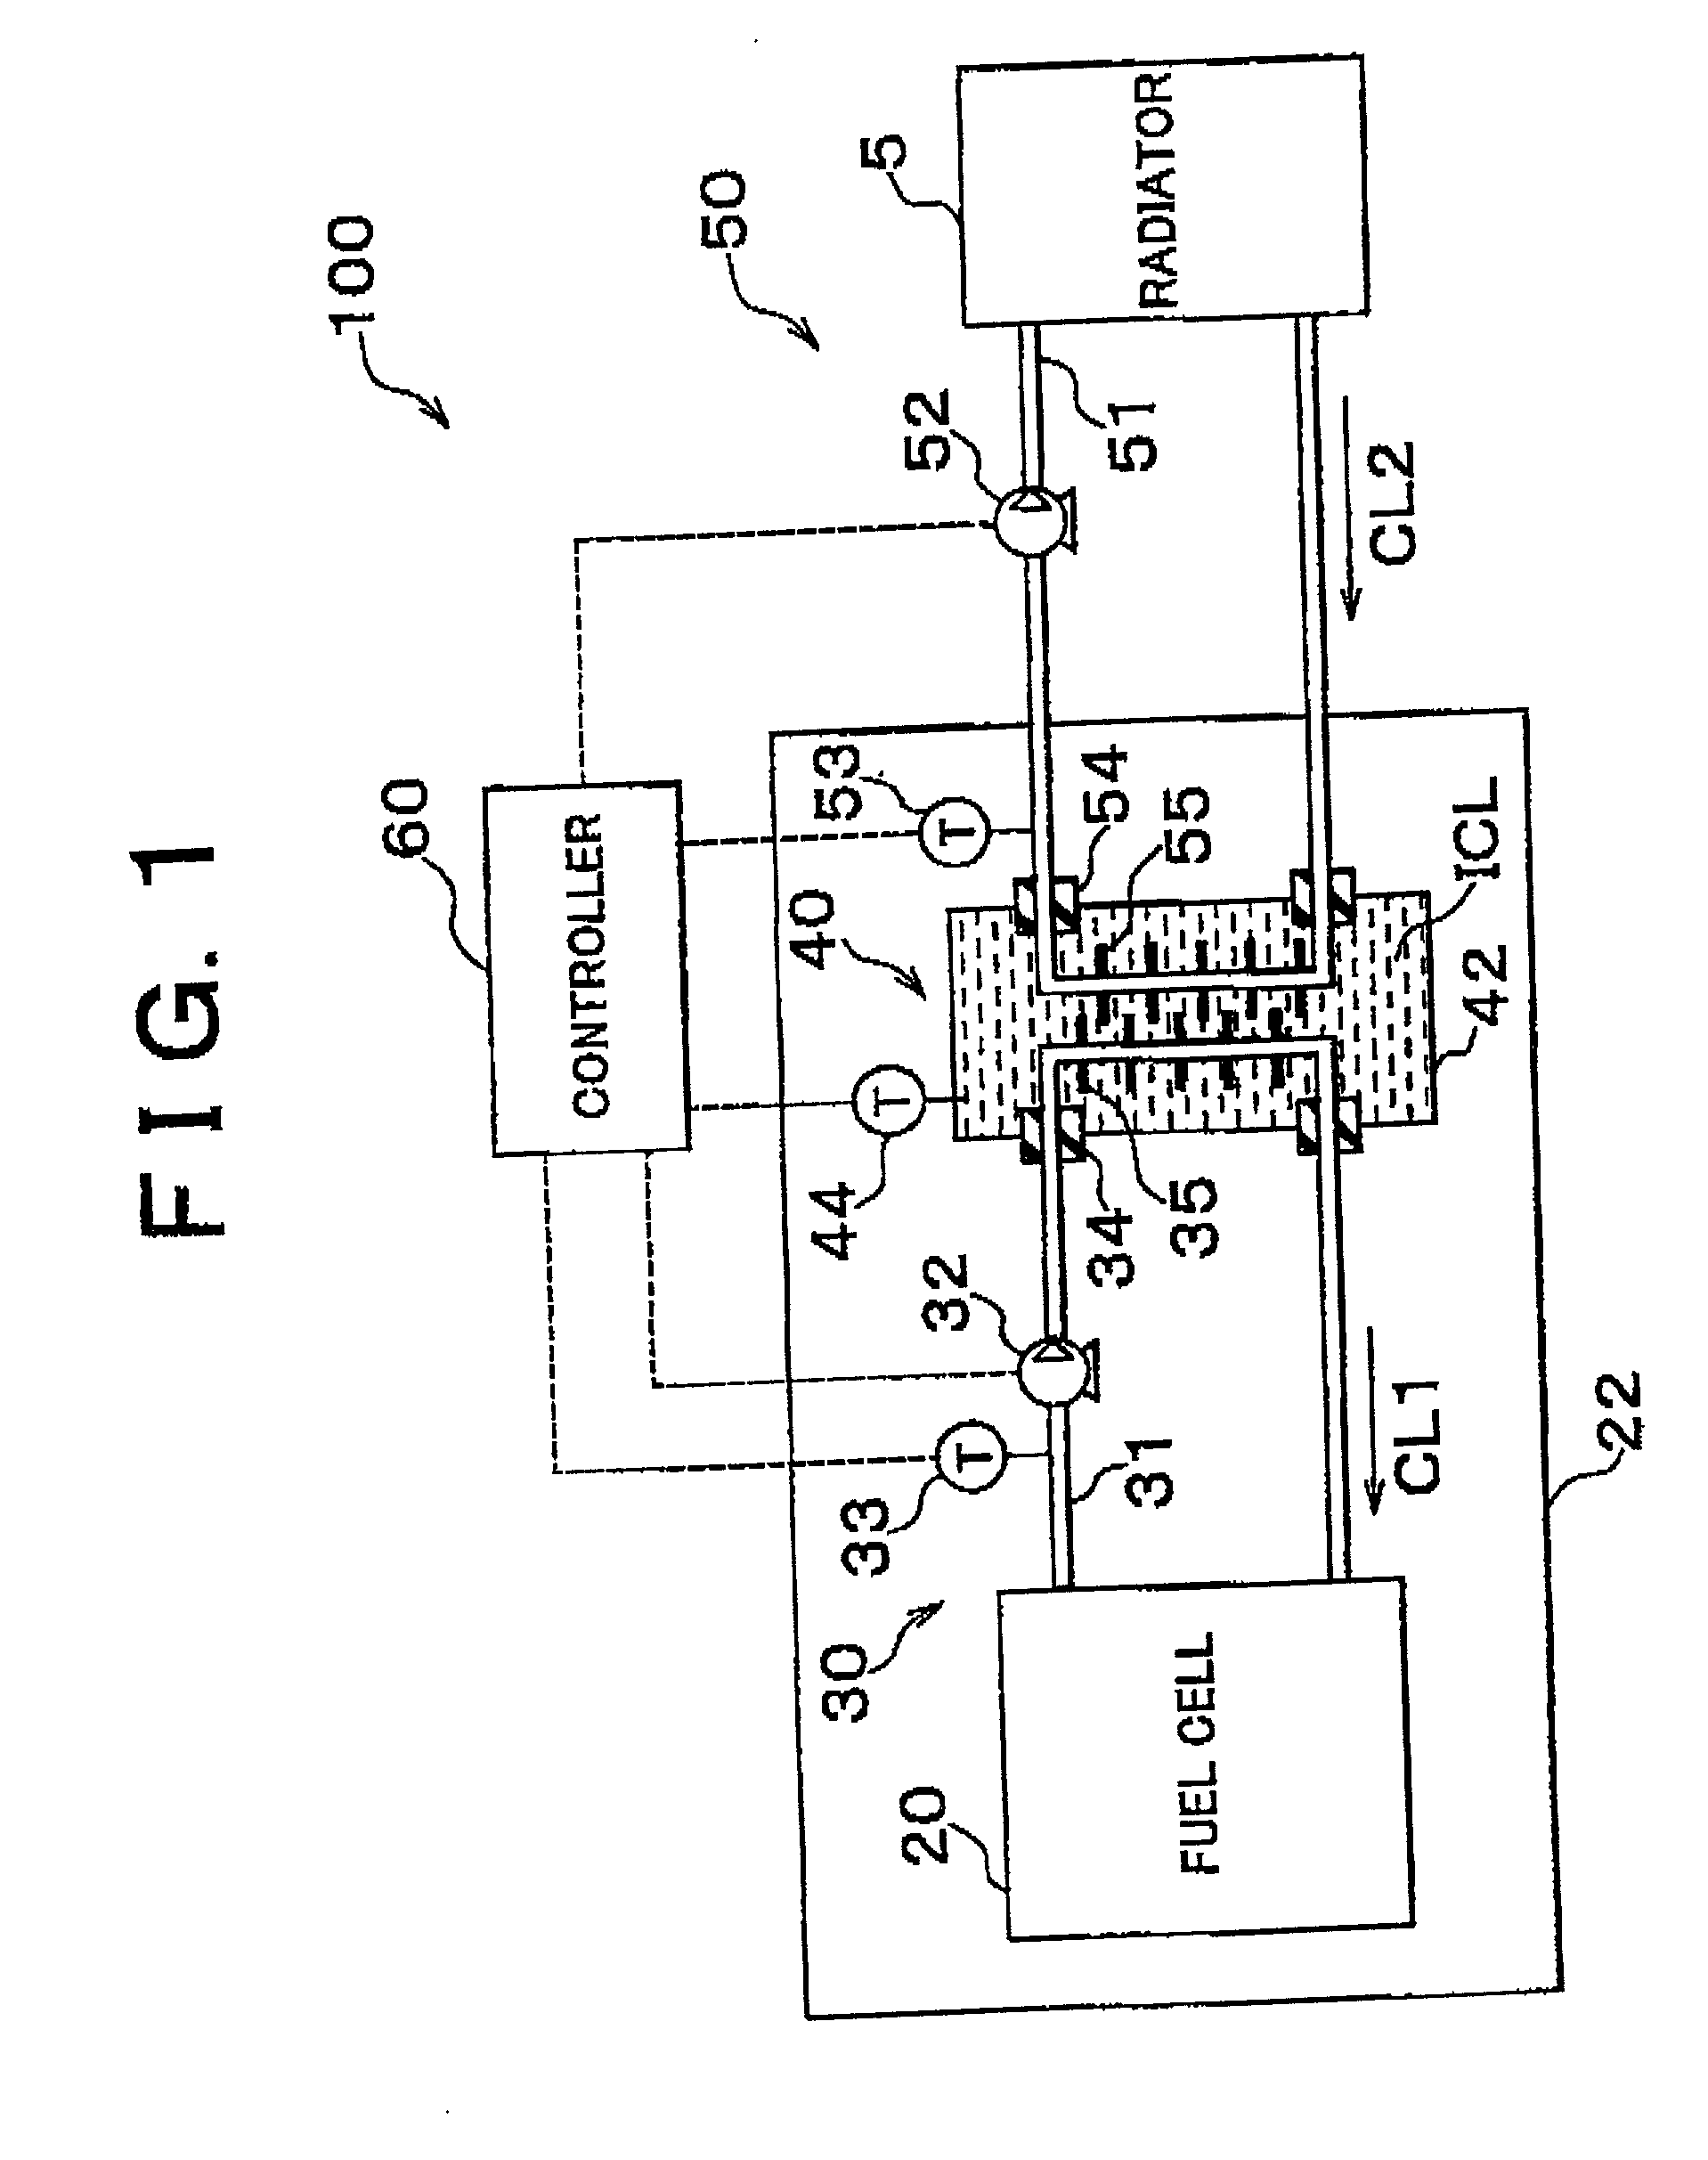 Fuel cell system having cooling apparatus